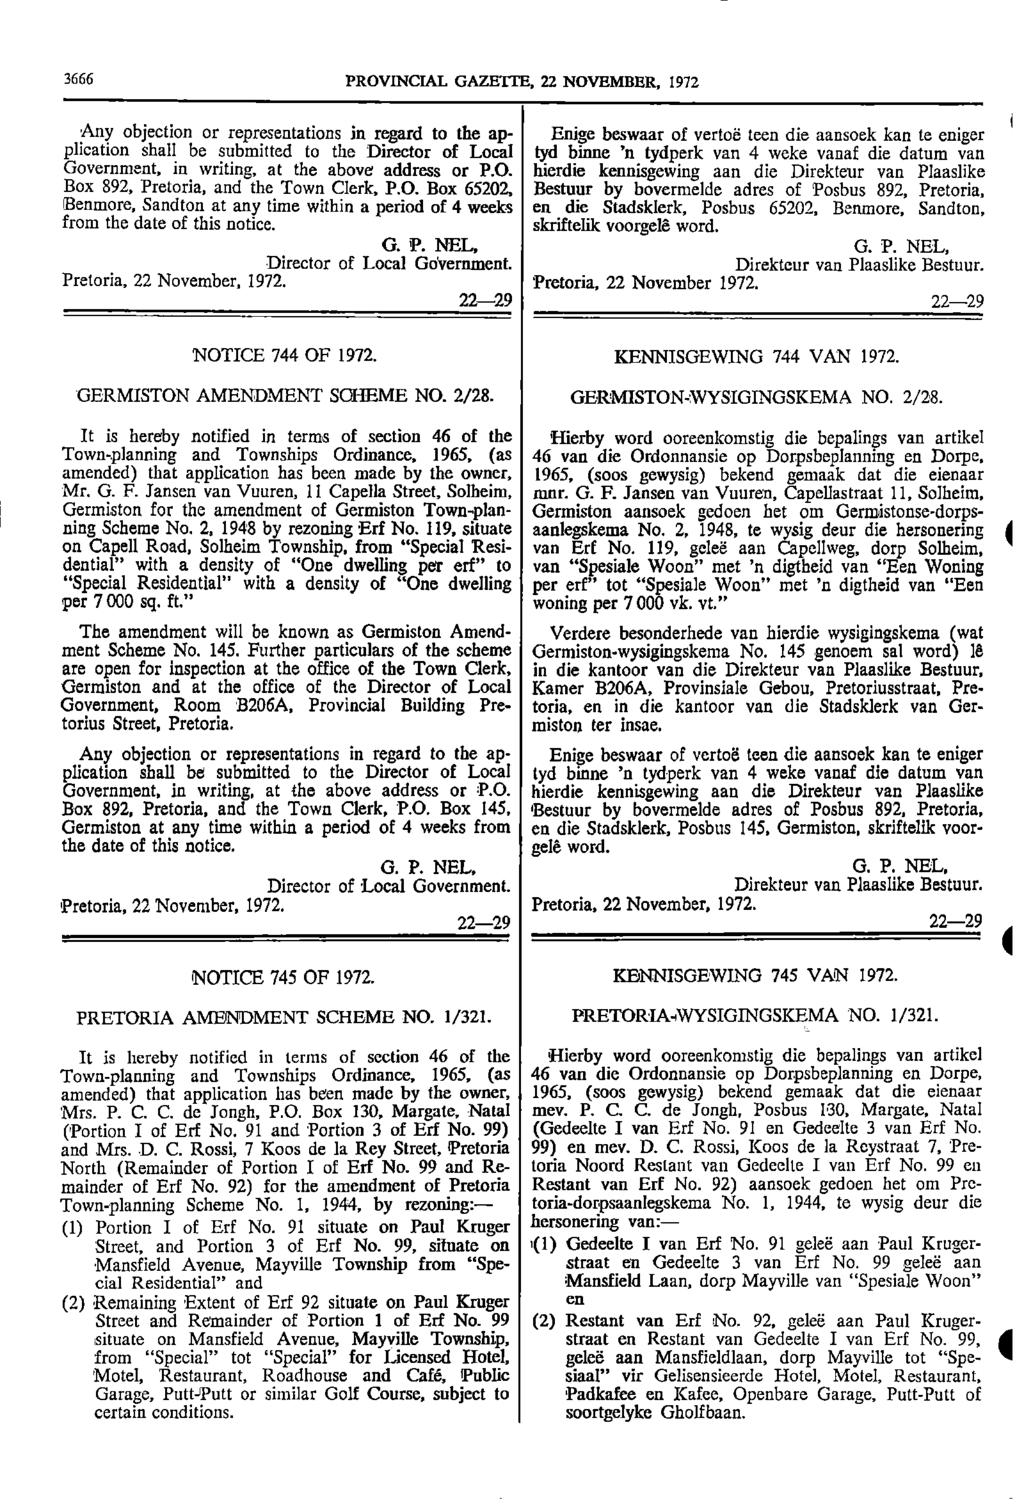 3666 PROVINCIAL GAZETTE, 22 NOVEMBER, 1972 Any objection or representations in regard to the ap Enige beswaar of vertoe teen die aansoek kan te eniger plication shall be submitted to the Director of